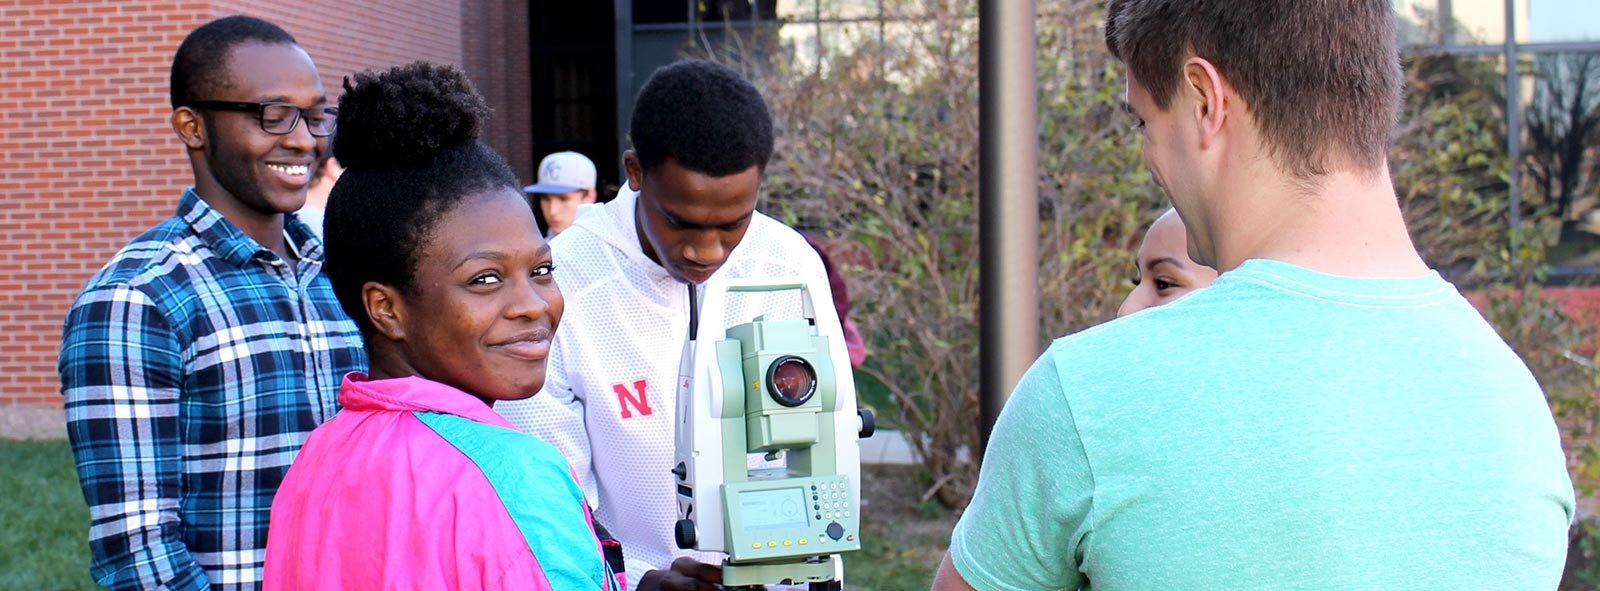 Four engineering students use a scope to survey outside the engineering complex. One student is facing the camera and smiling and another is looking into the scope.